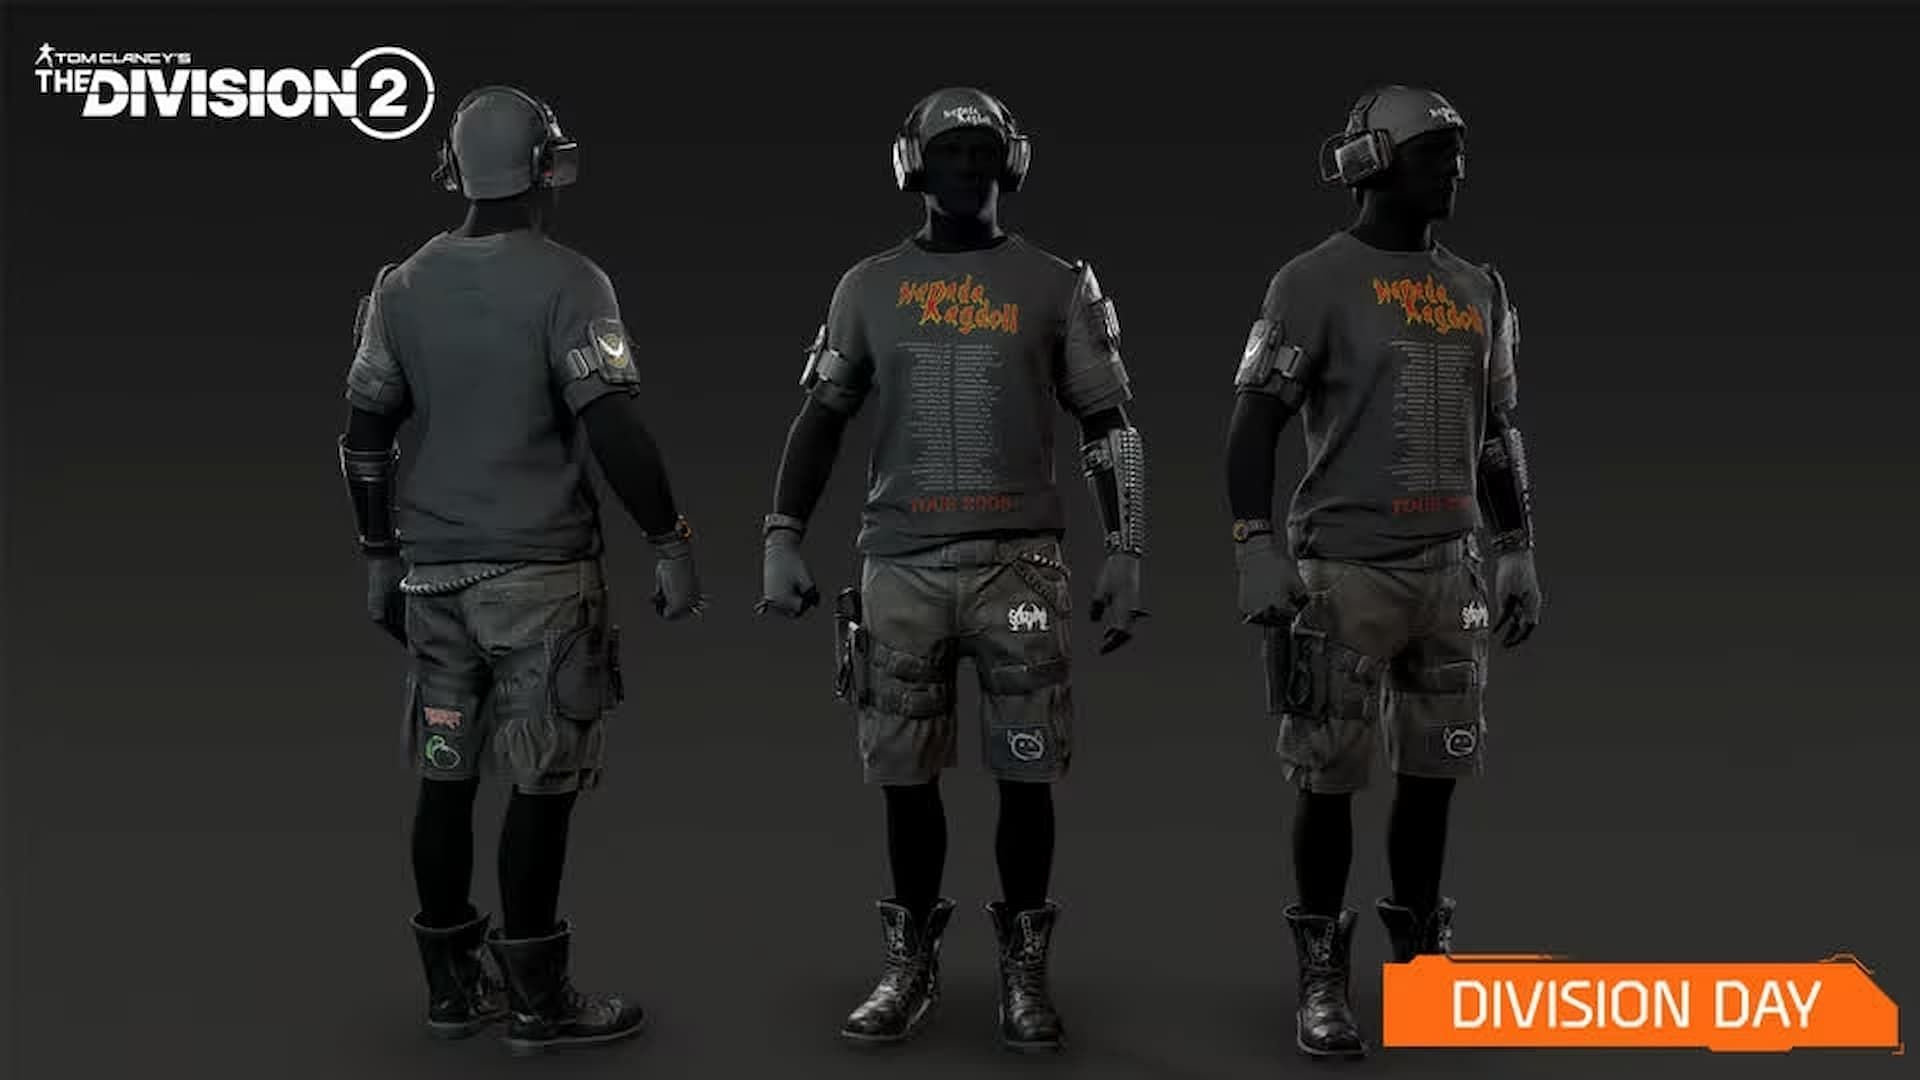 The Metalhead Outfit in Tom Clancy